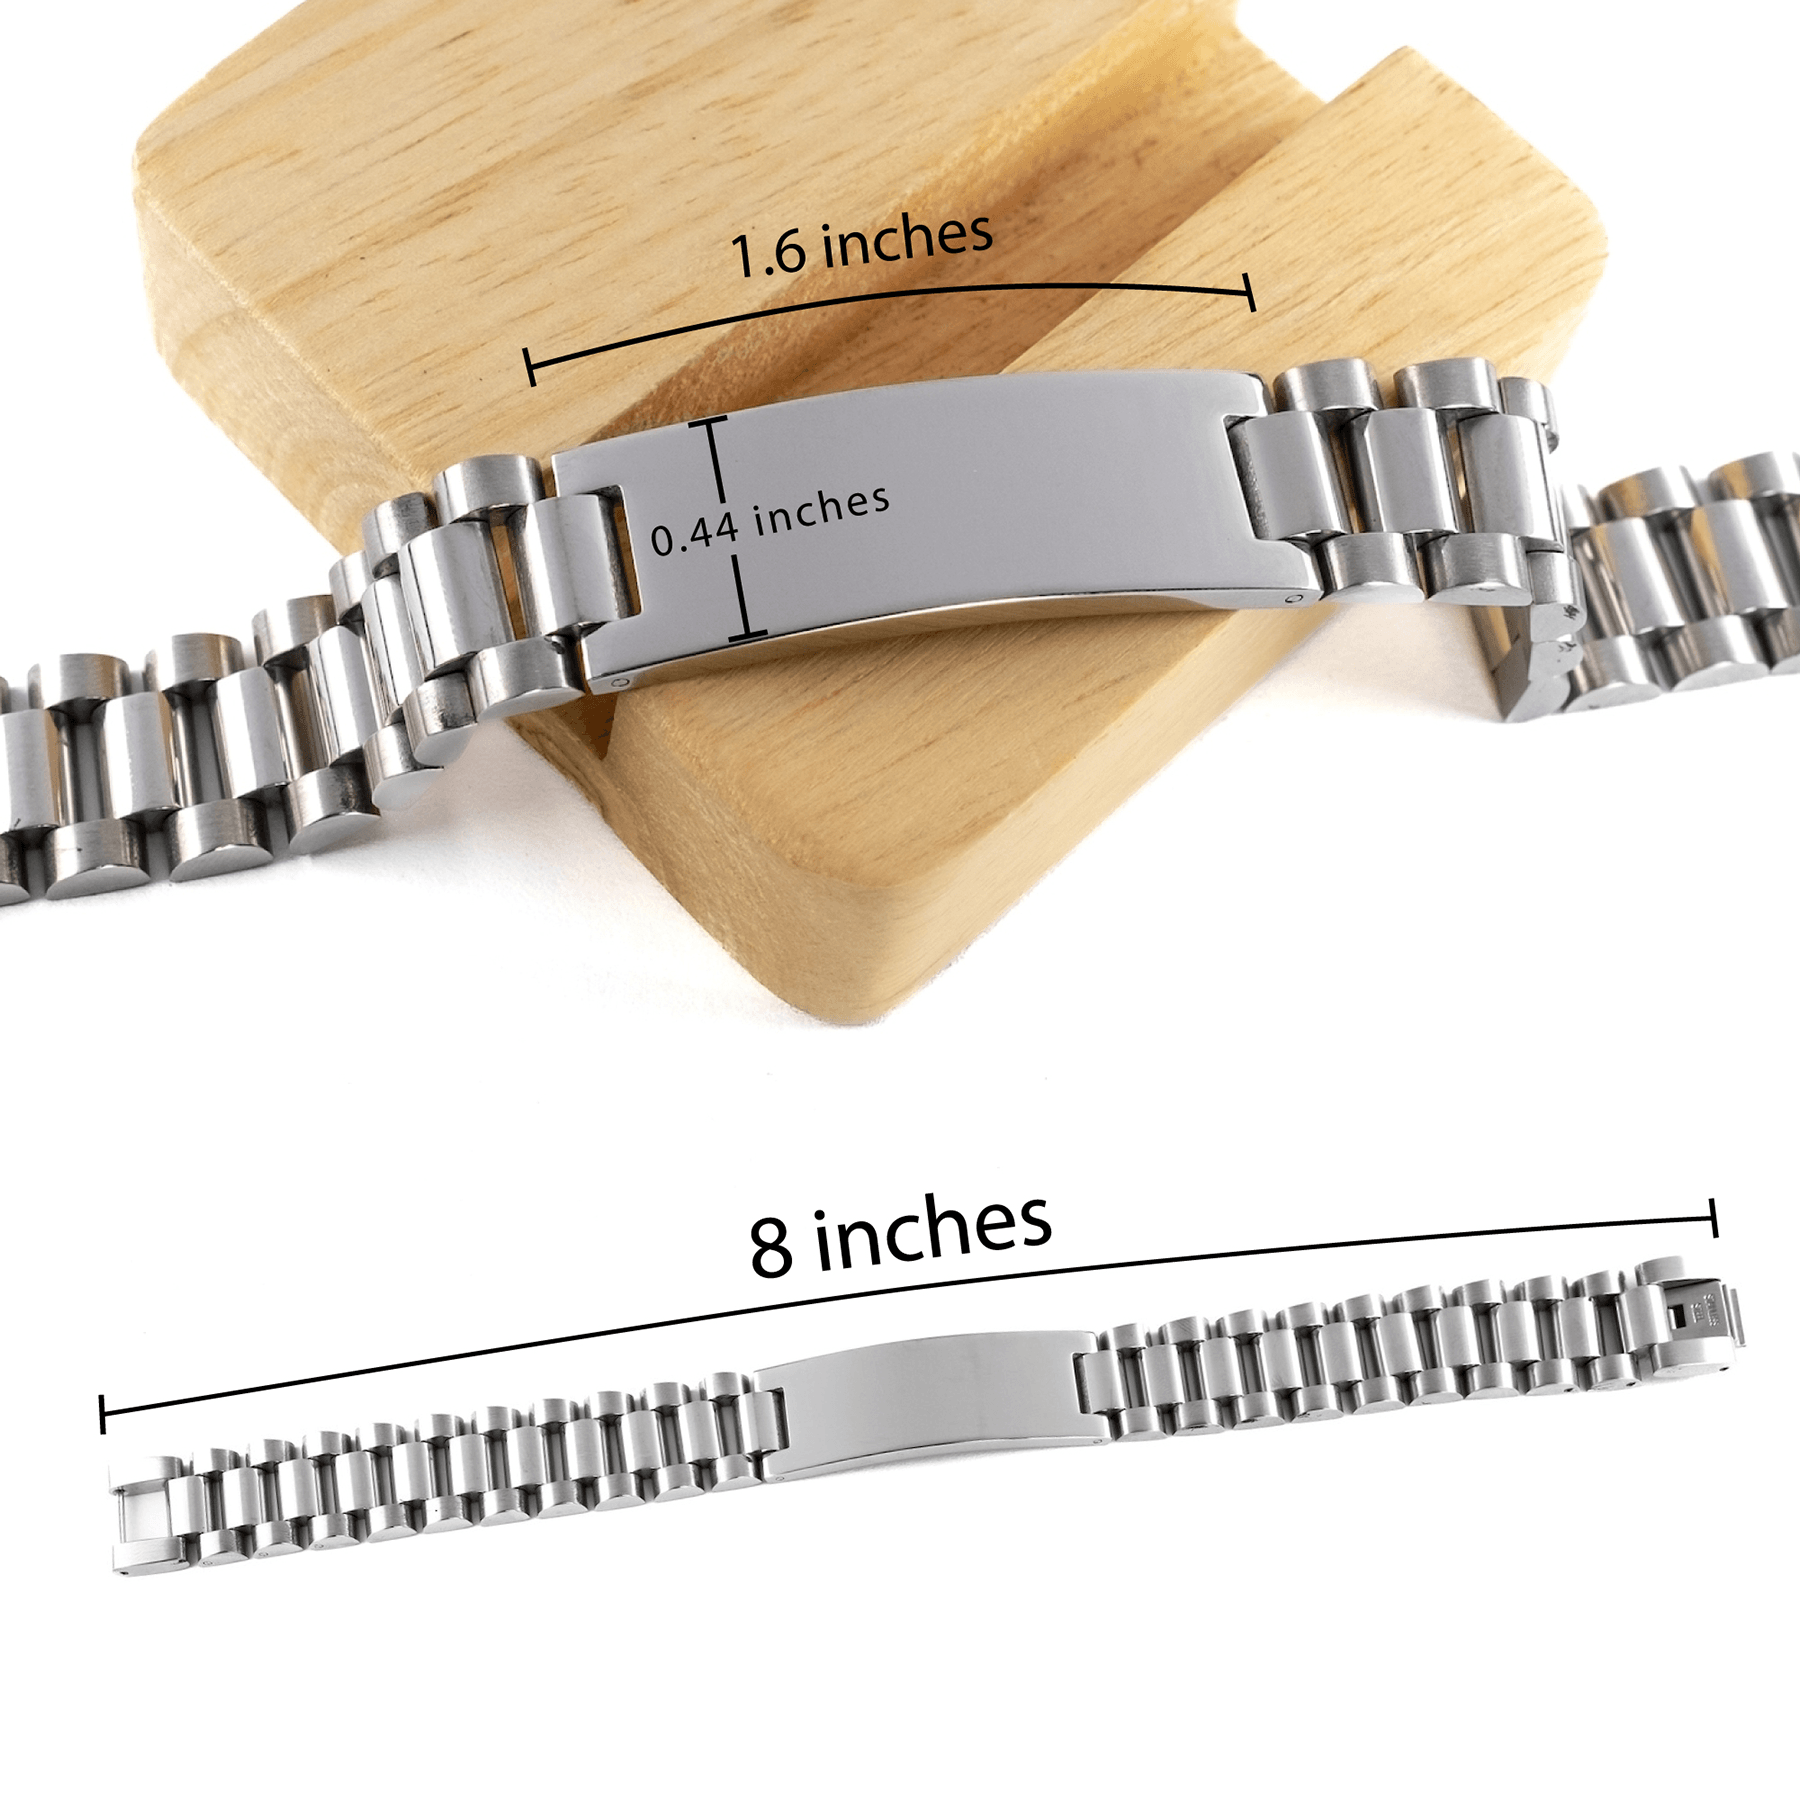 Sarcastic Financial Advisor Ladder Stainless Steel Bracelet Gifts, Christmas Holiday Gifts for Financial Advisor Birthday, Financial Advisor: Because greatness is woven into the fabric of every day, Coworkers, Friends - Mallard Moon Gift Shop